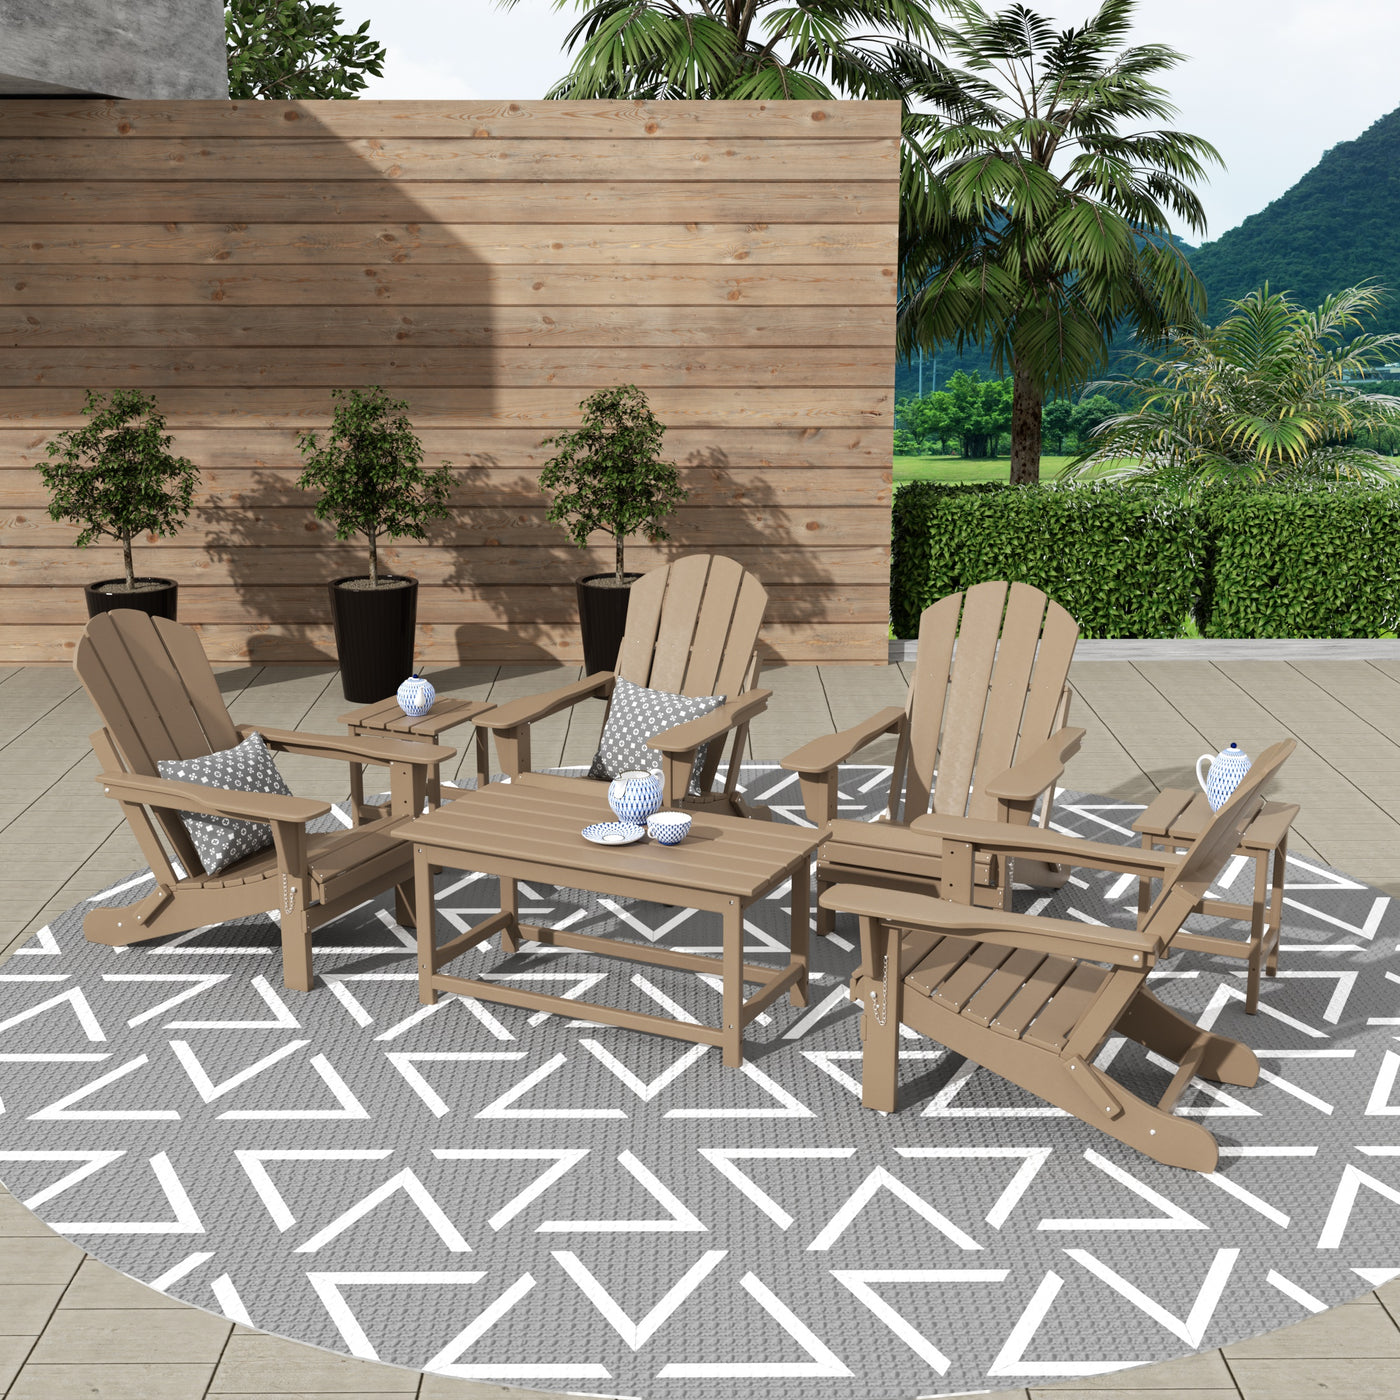 Malibu Outdoor Folding Poly Adirondack Chair with Coffee Table Side Table 7 Pieces Set